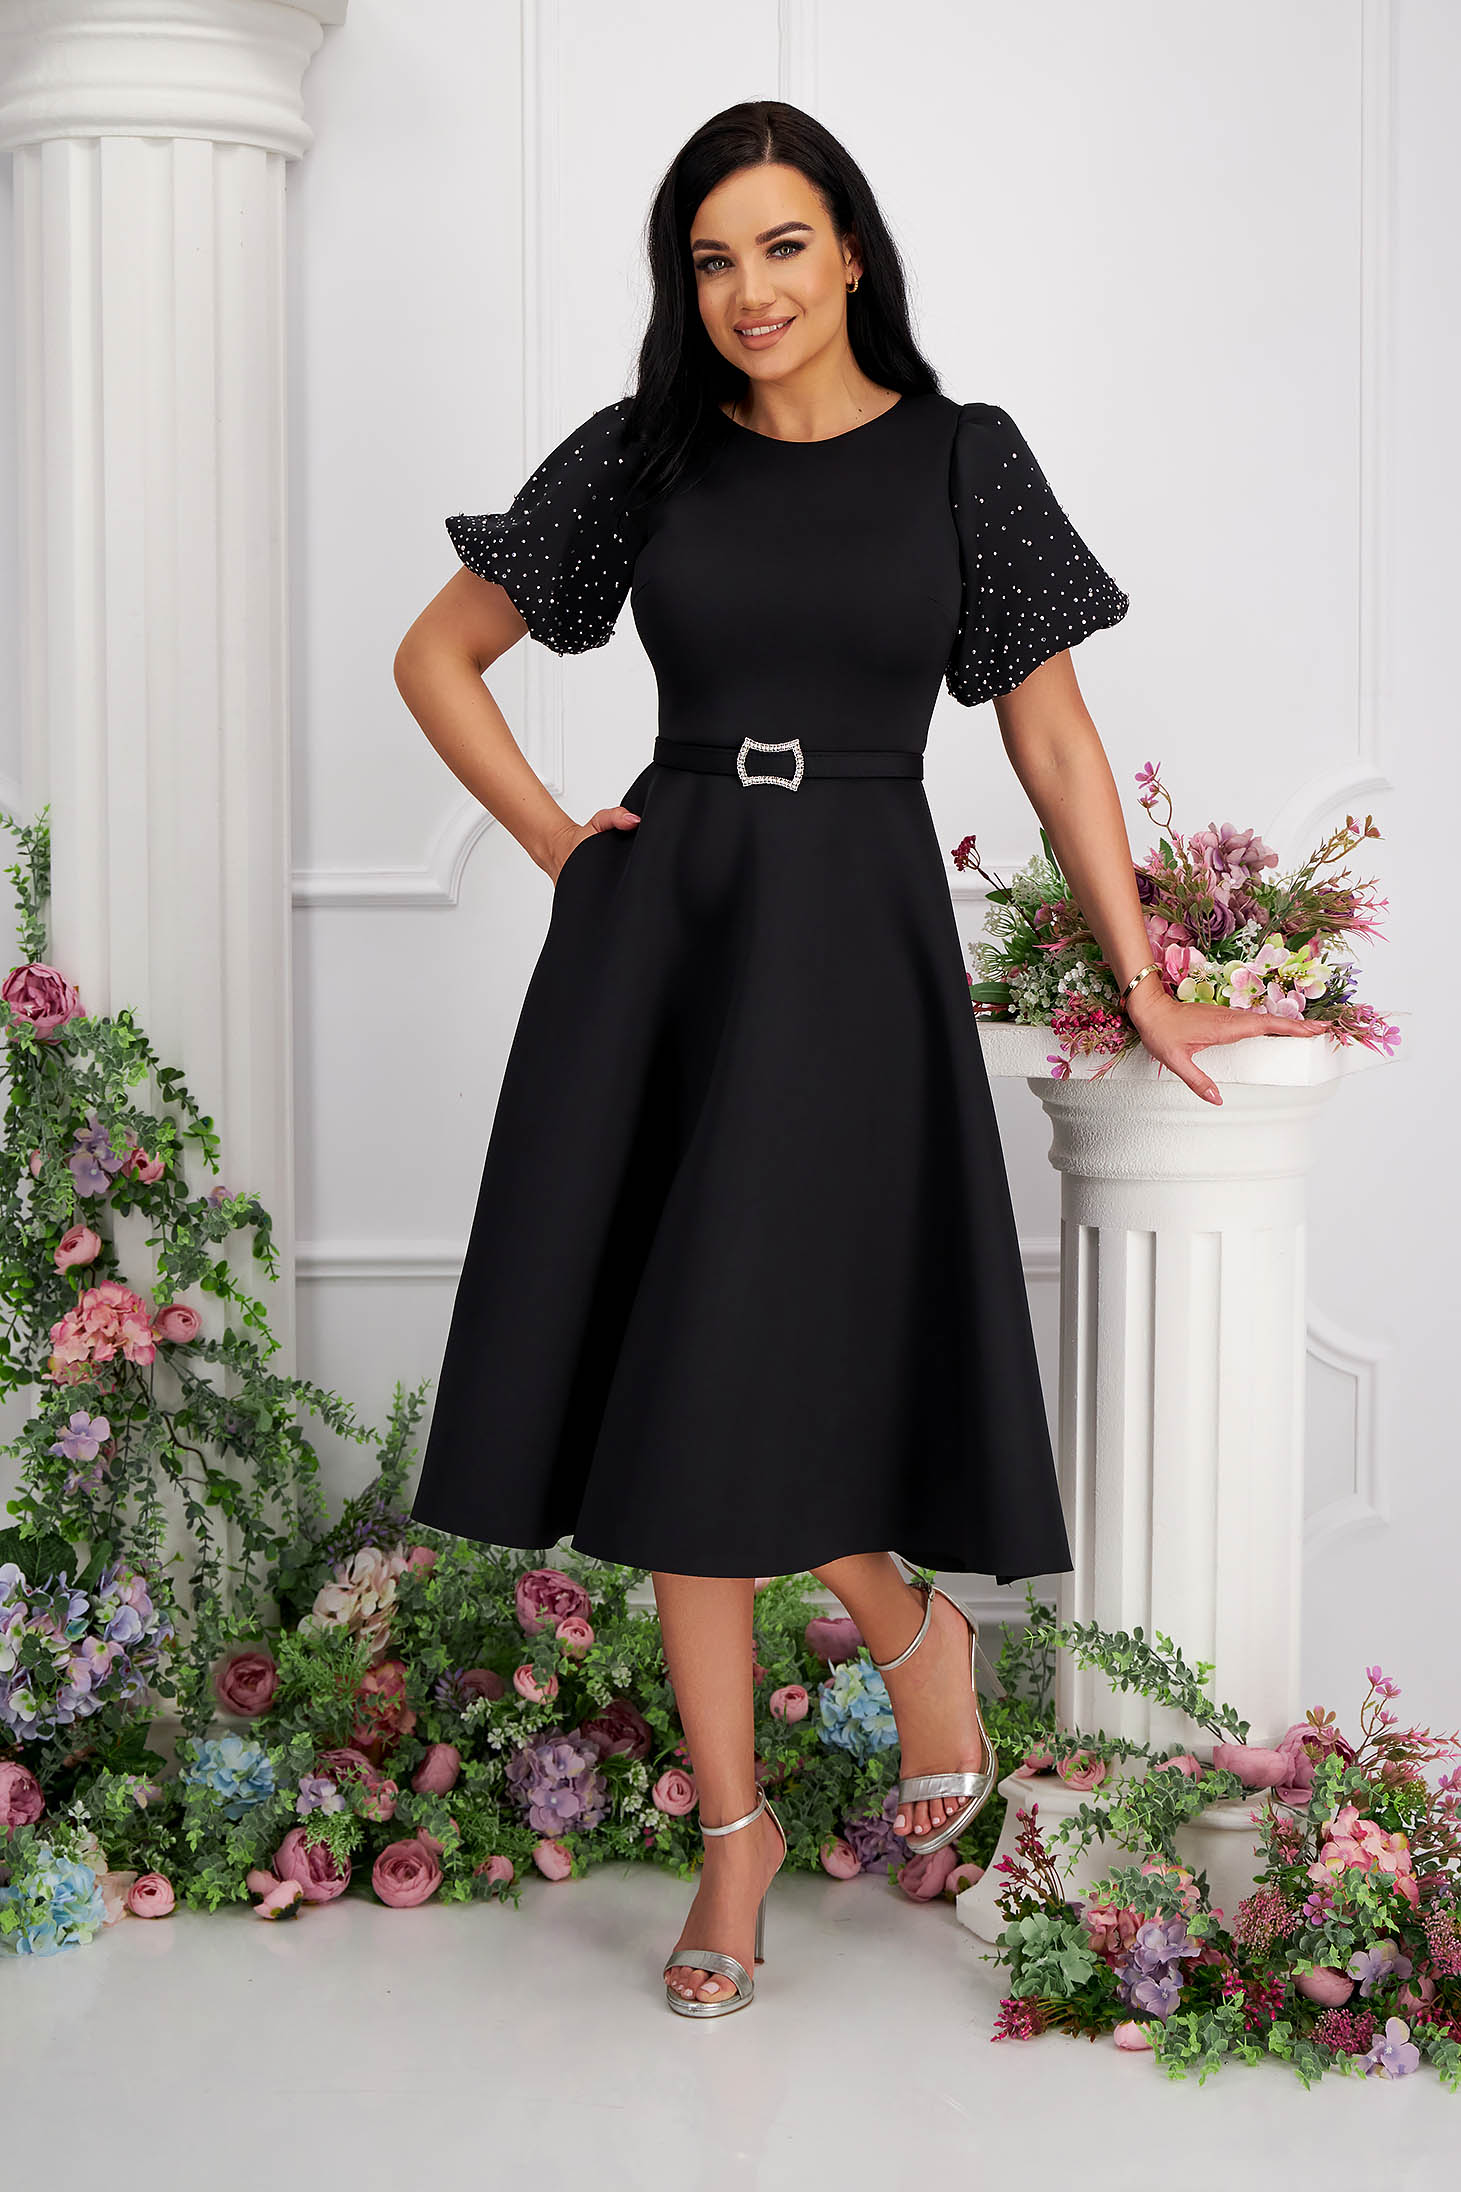 Black neoprene midi skater dress with side pockets and puffed sleeves with rhinestones 3 - StarShinerS.com